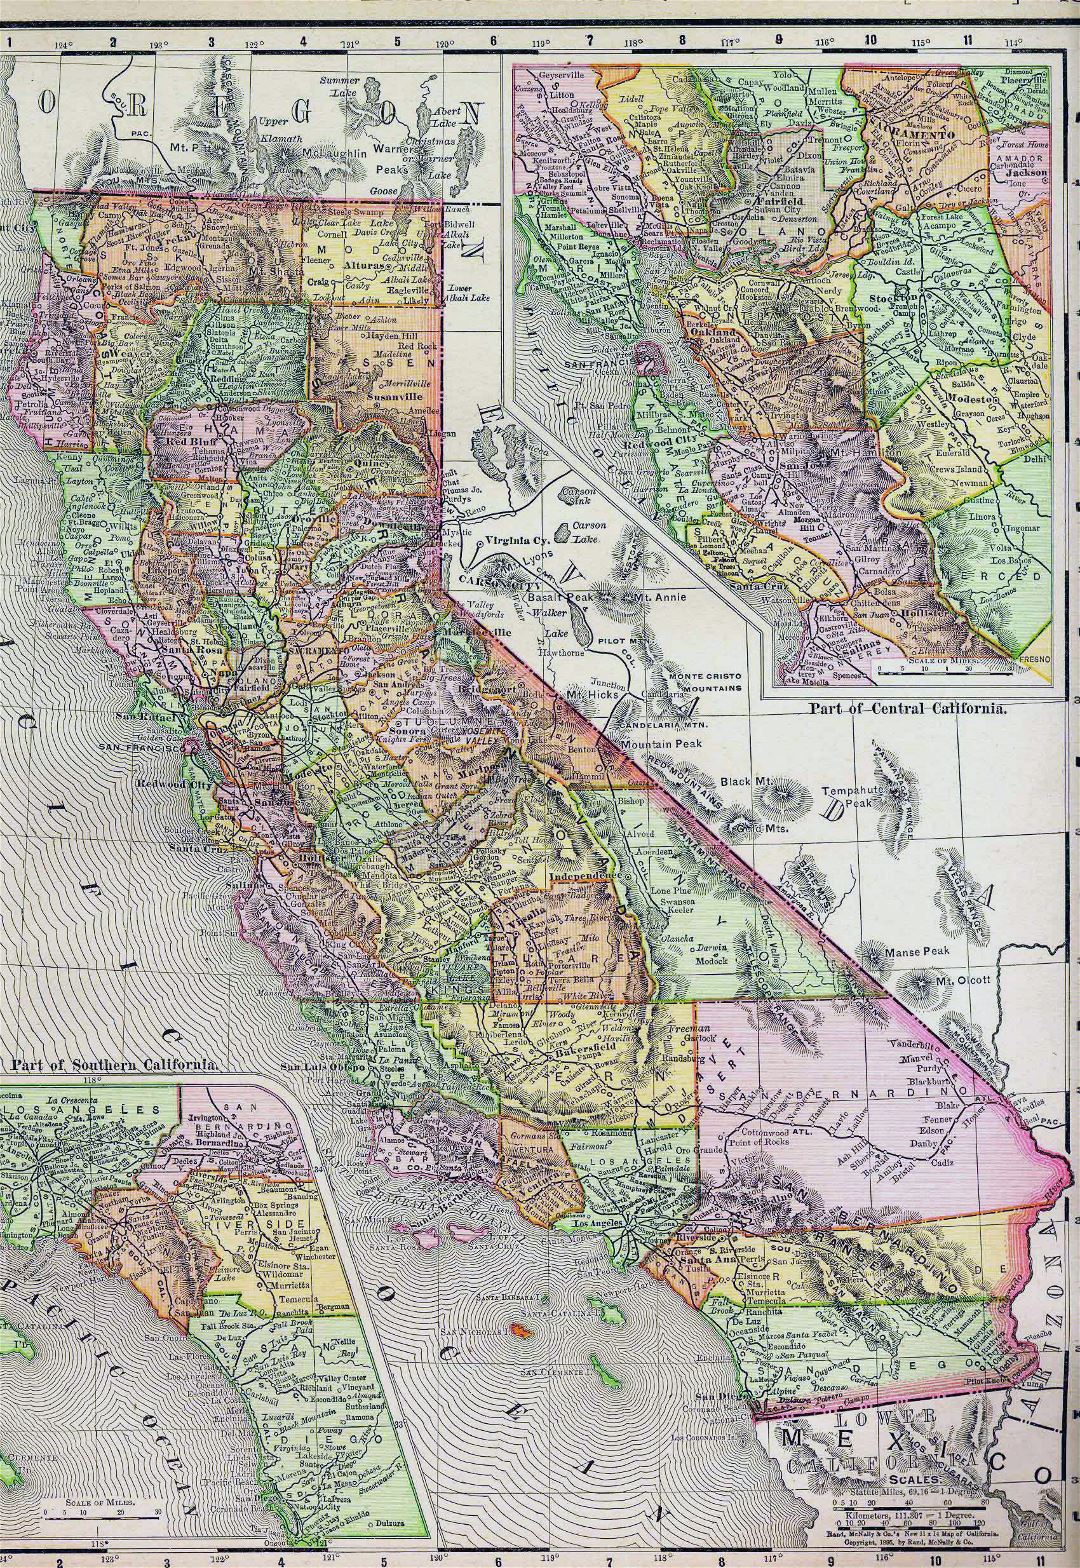 Detaled old administrative map of California state - 1895